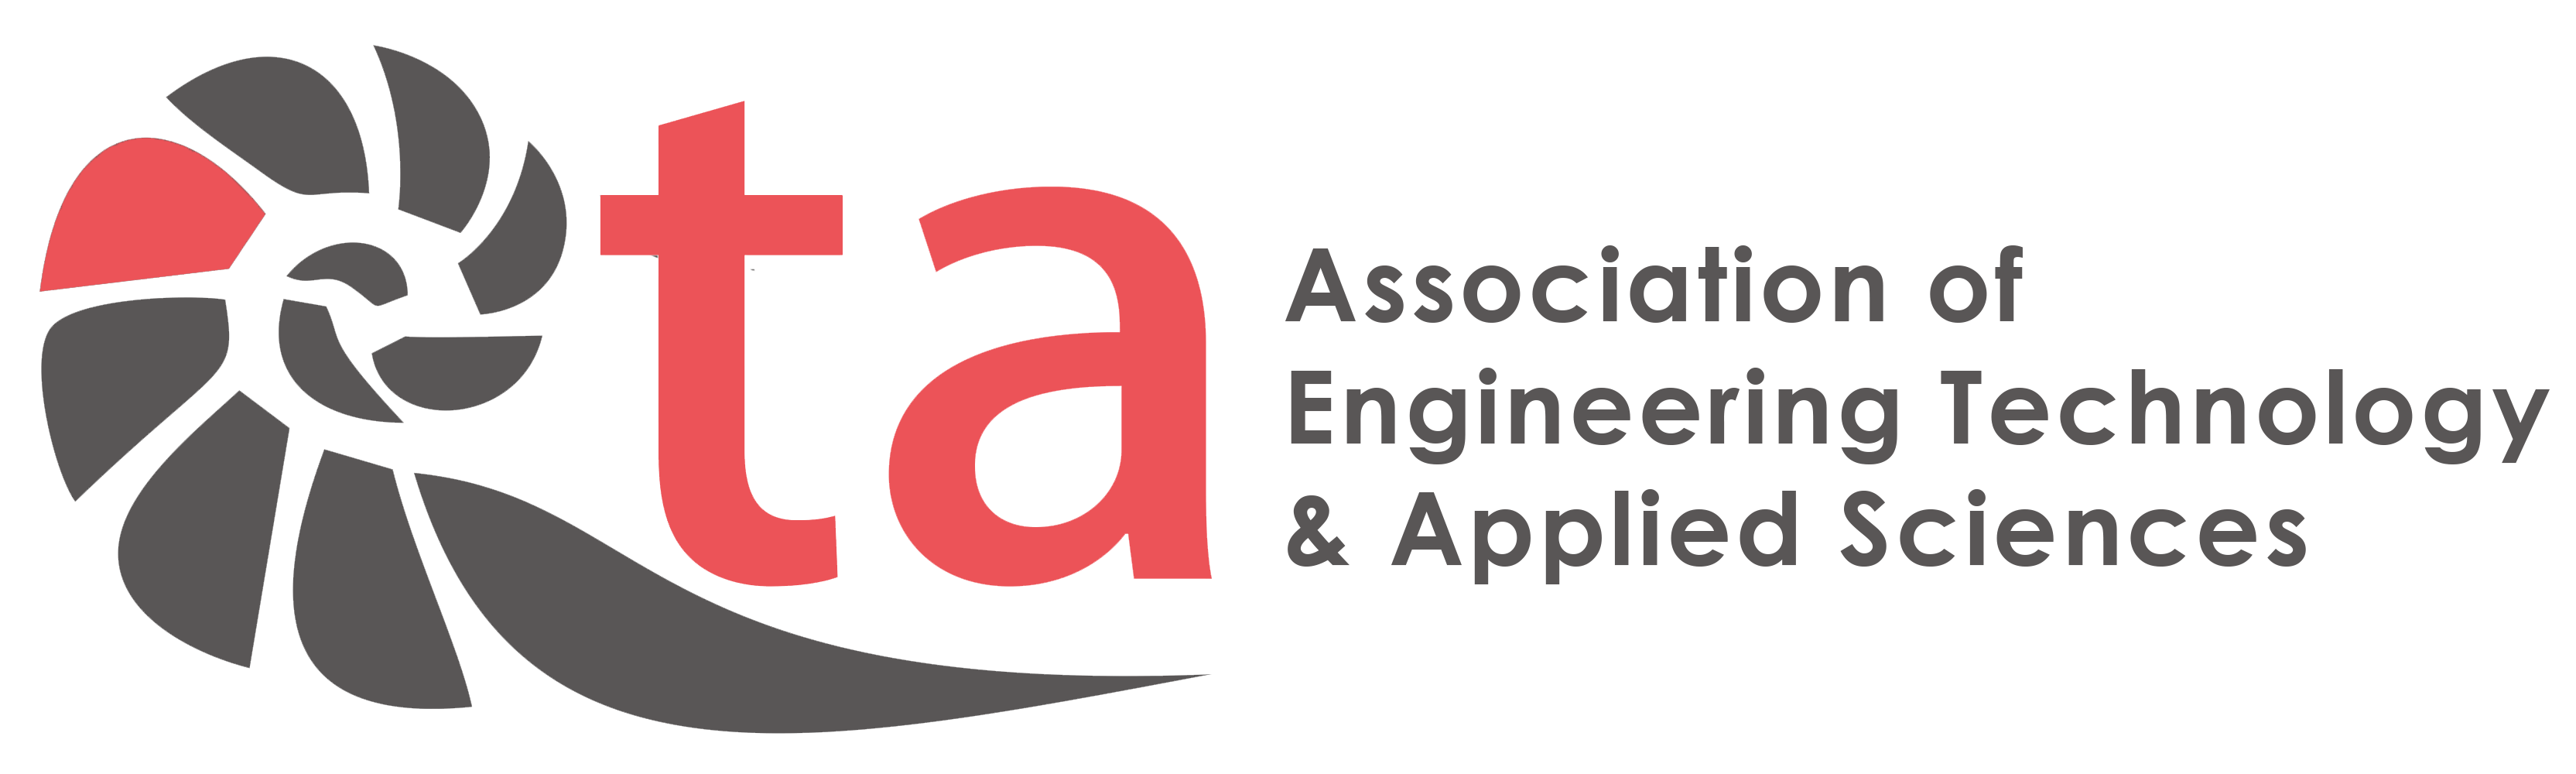 AETA International Conference on Modern Trends in Industrial Engineering, Applied Sciences, Business Technology, Multimedia & Image Processing  (IABP)